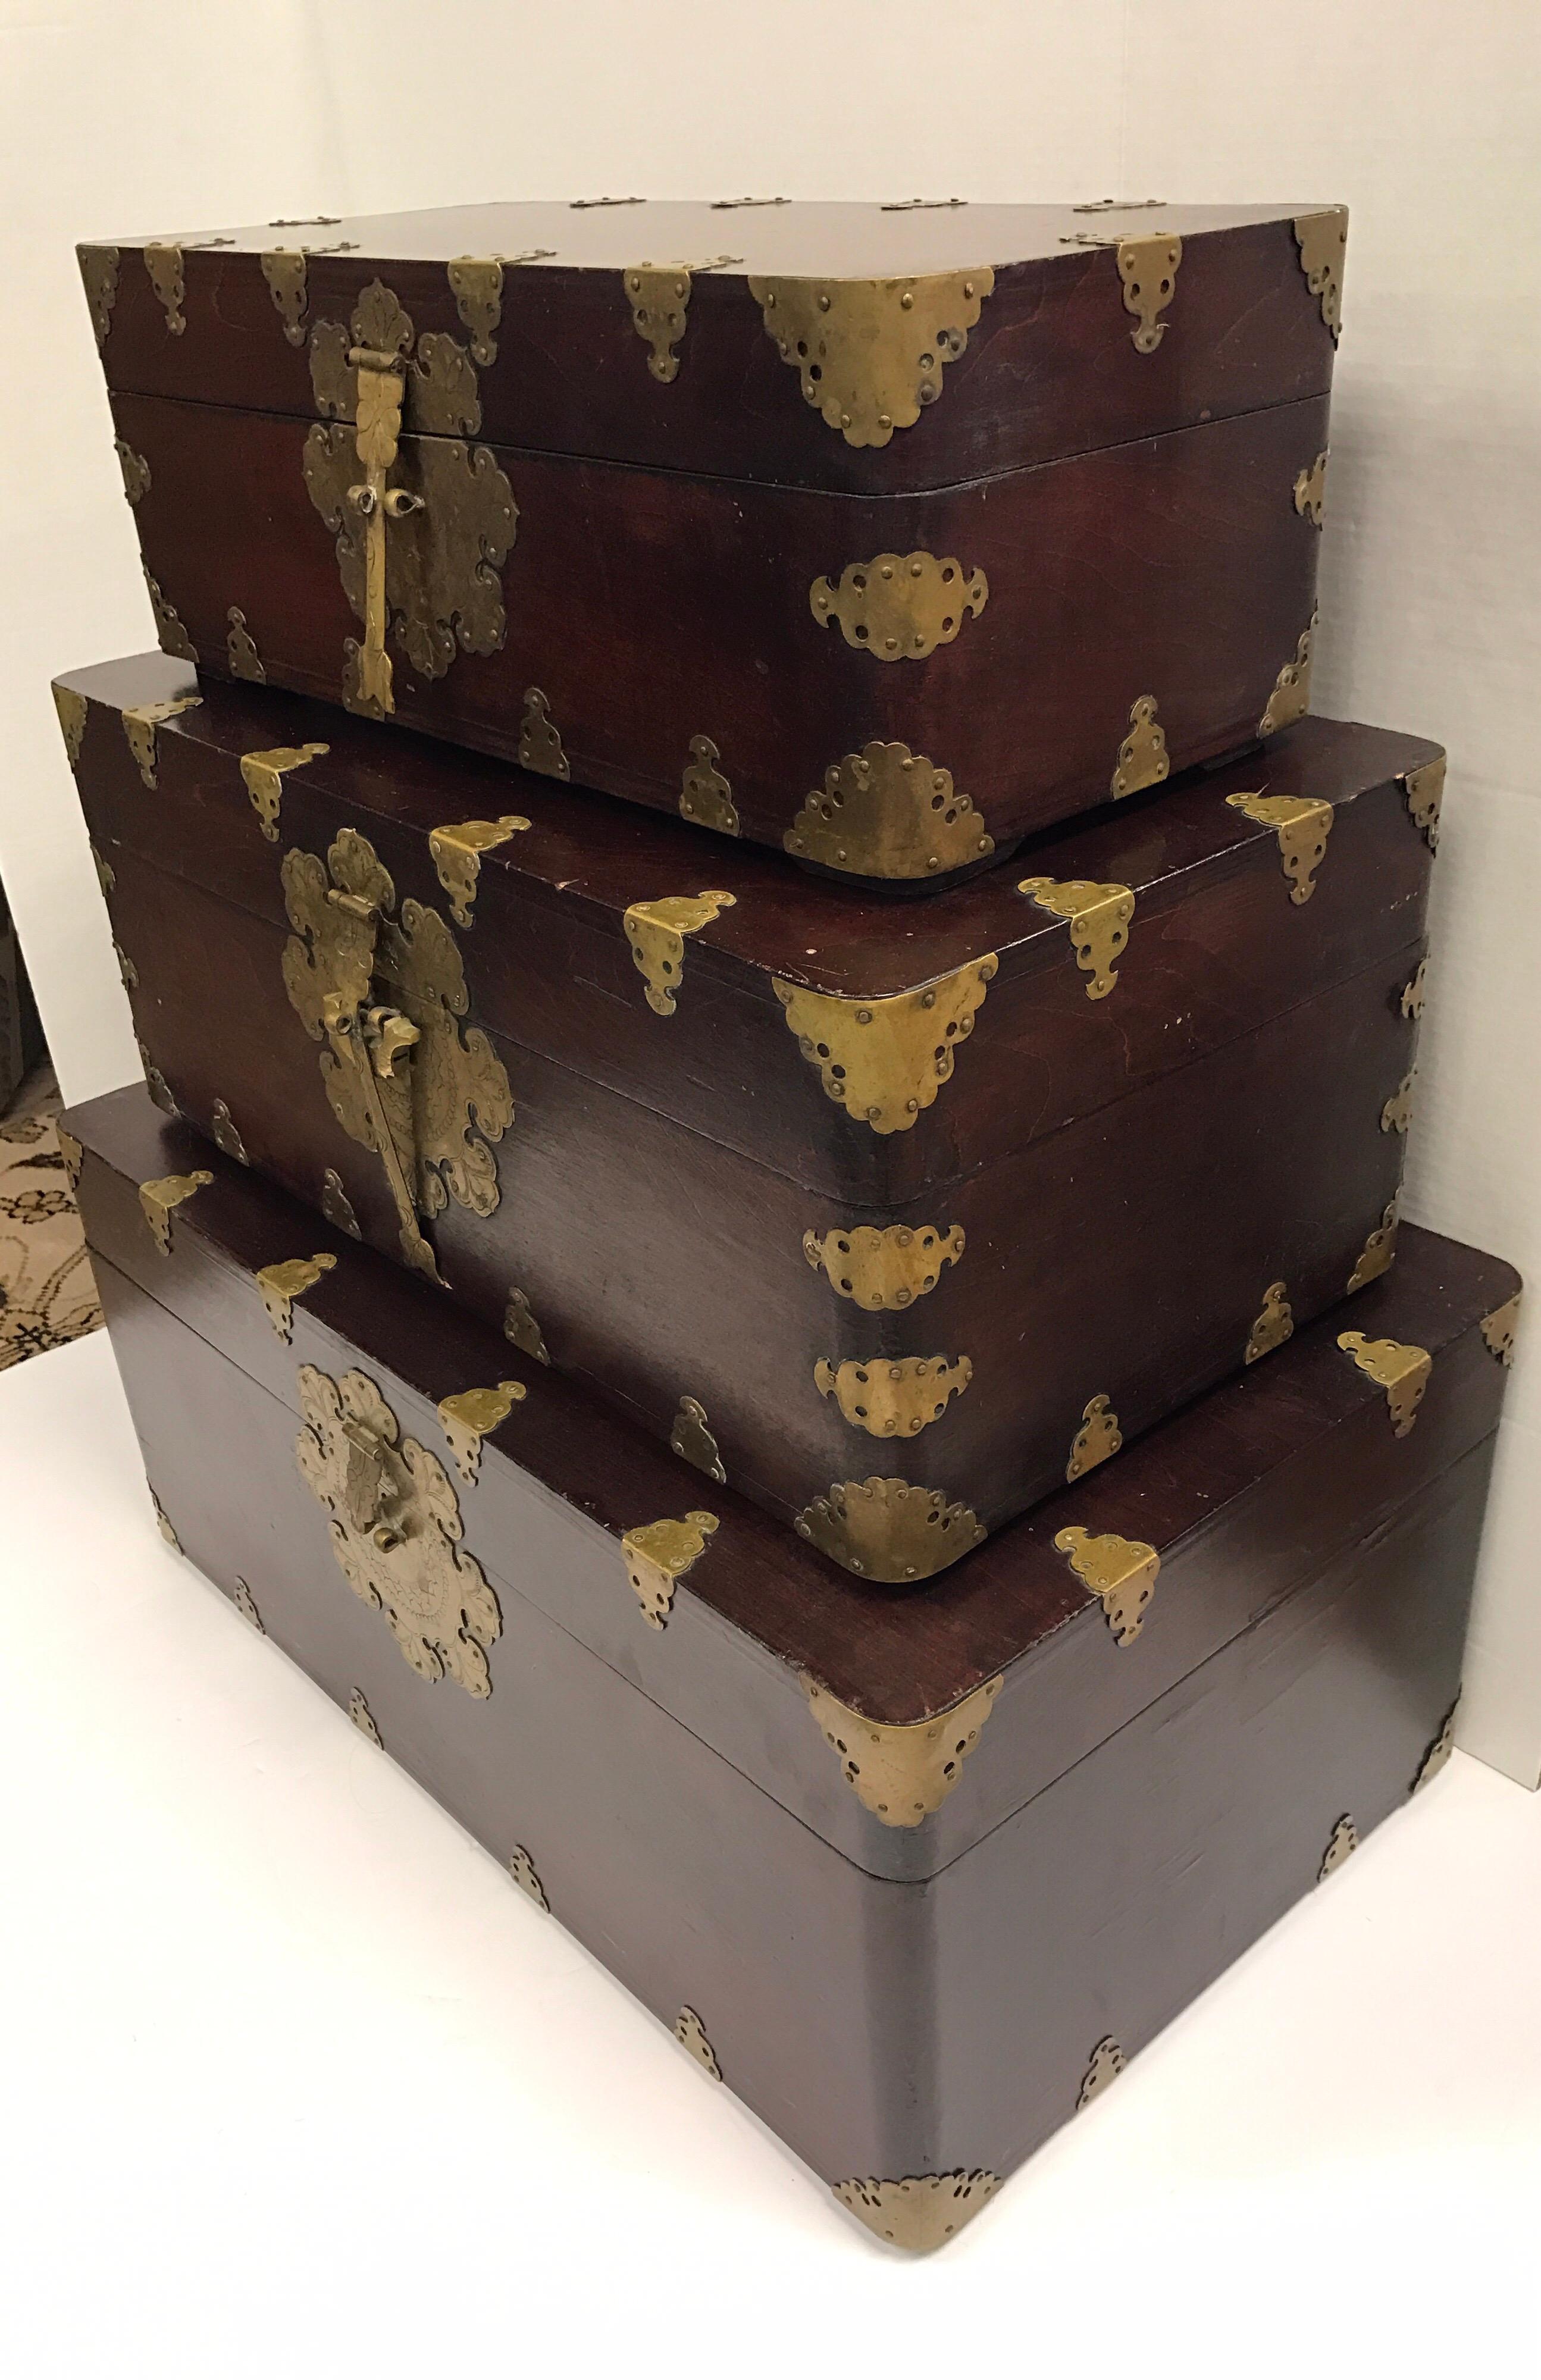 Matching set of antique Asian boxes that can function several ways.
Dimensions of each box:
20 x 9.5 x 7.5
23 x 12.5 x 9
26 x 16 x 11.5.


